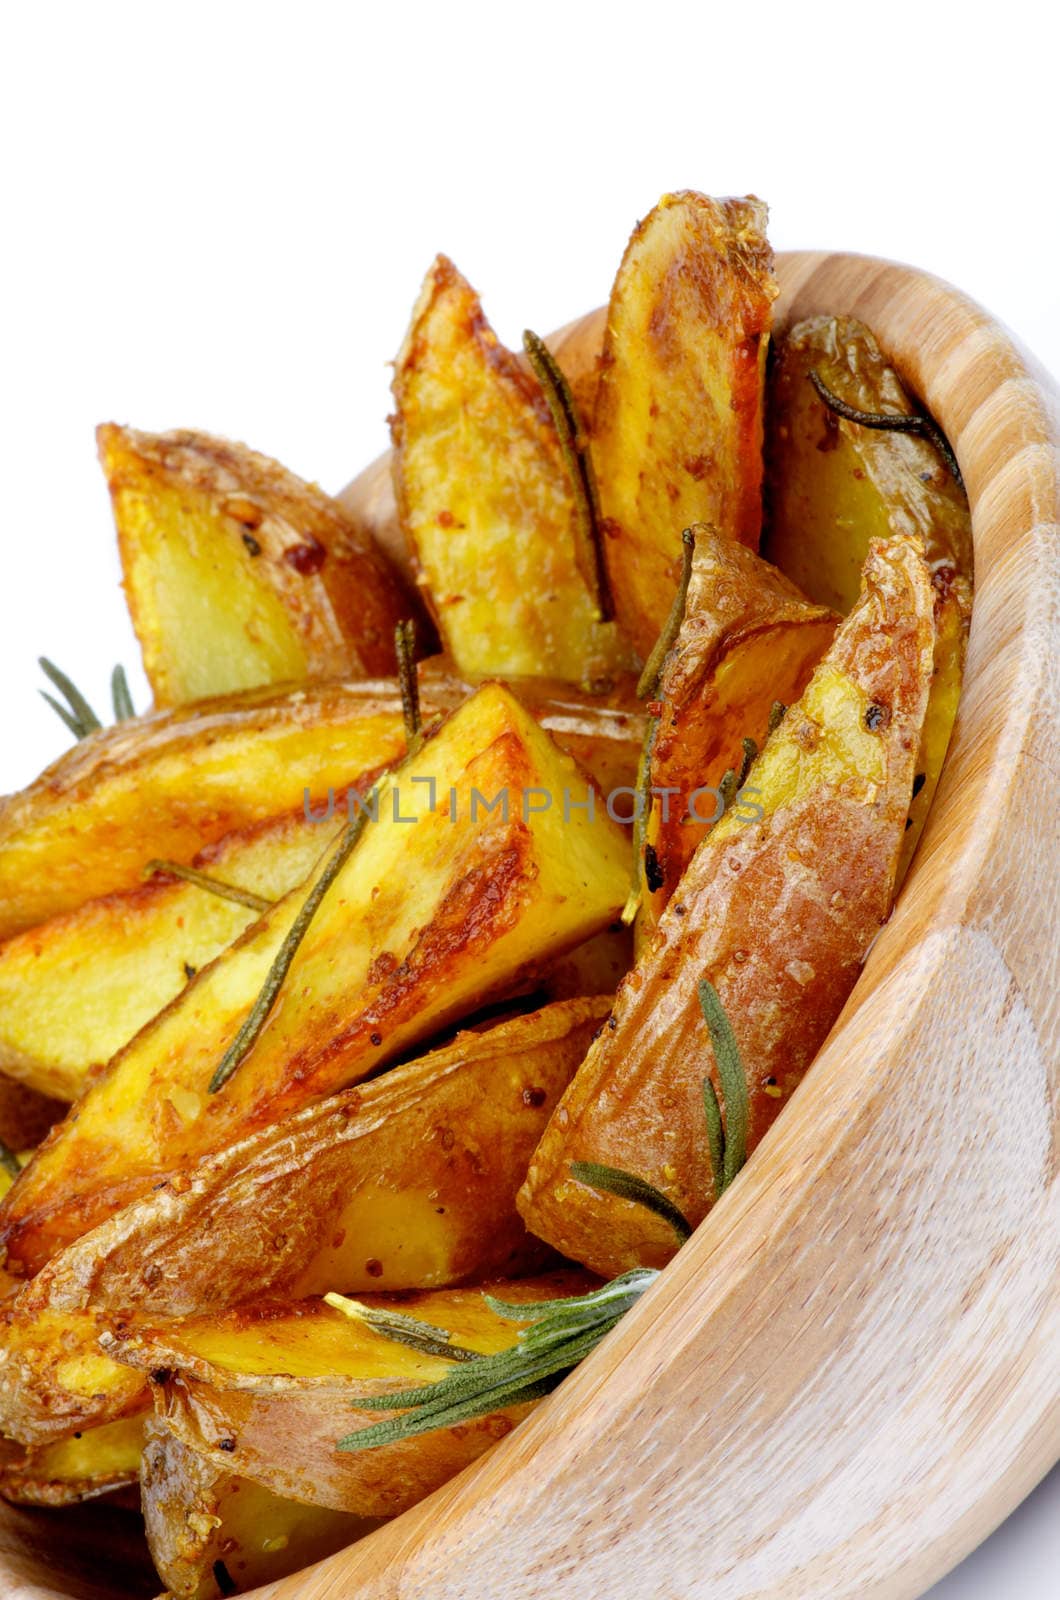 Delicious Roasted Potato Wedges with Rosemary and Spices in Wooden Bowl Cross Section on White background